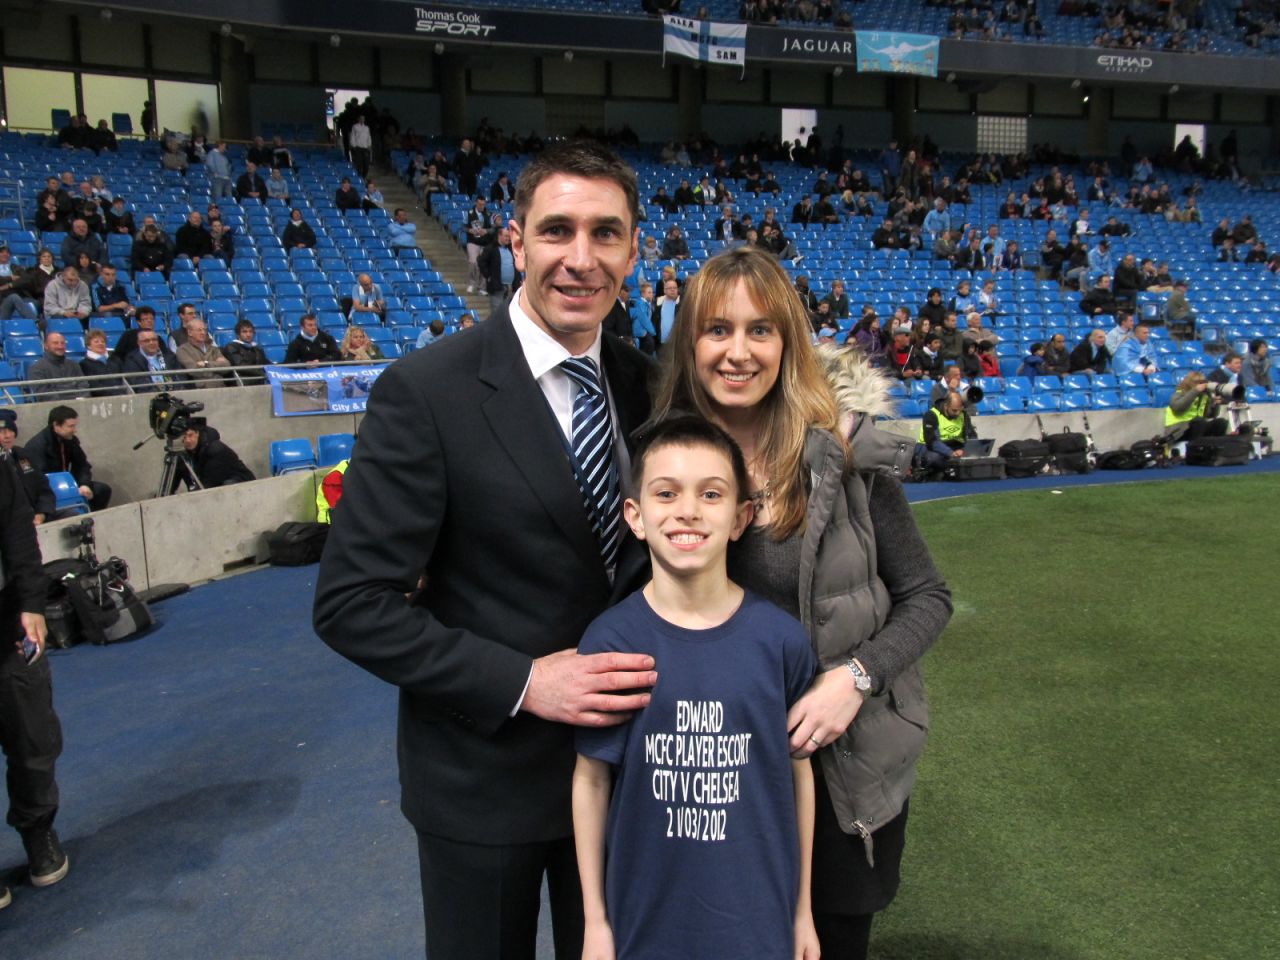 Edward Lake was diagnosed with autism very early on. His parents, former Manchester City player Paul and his mother Joanne, have been campaigning for greater awareness.